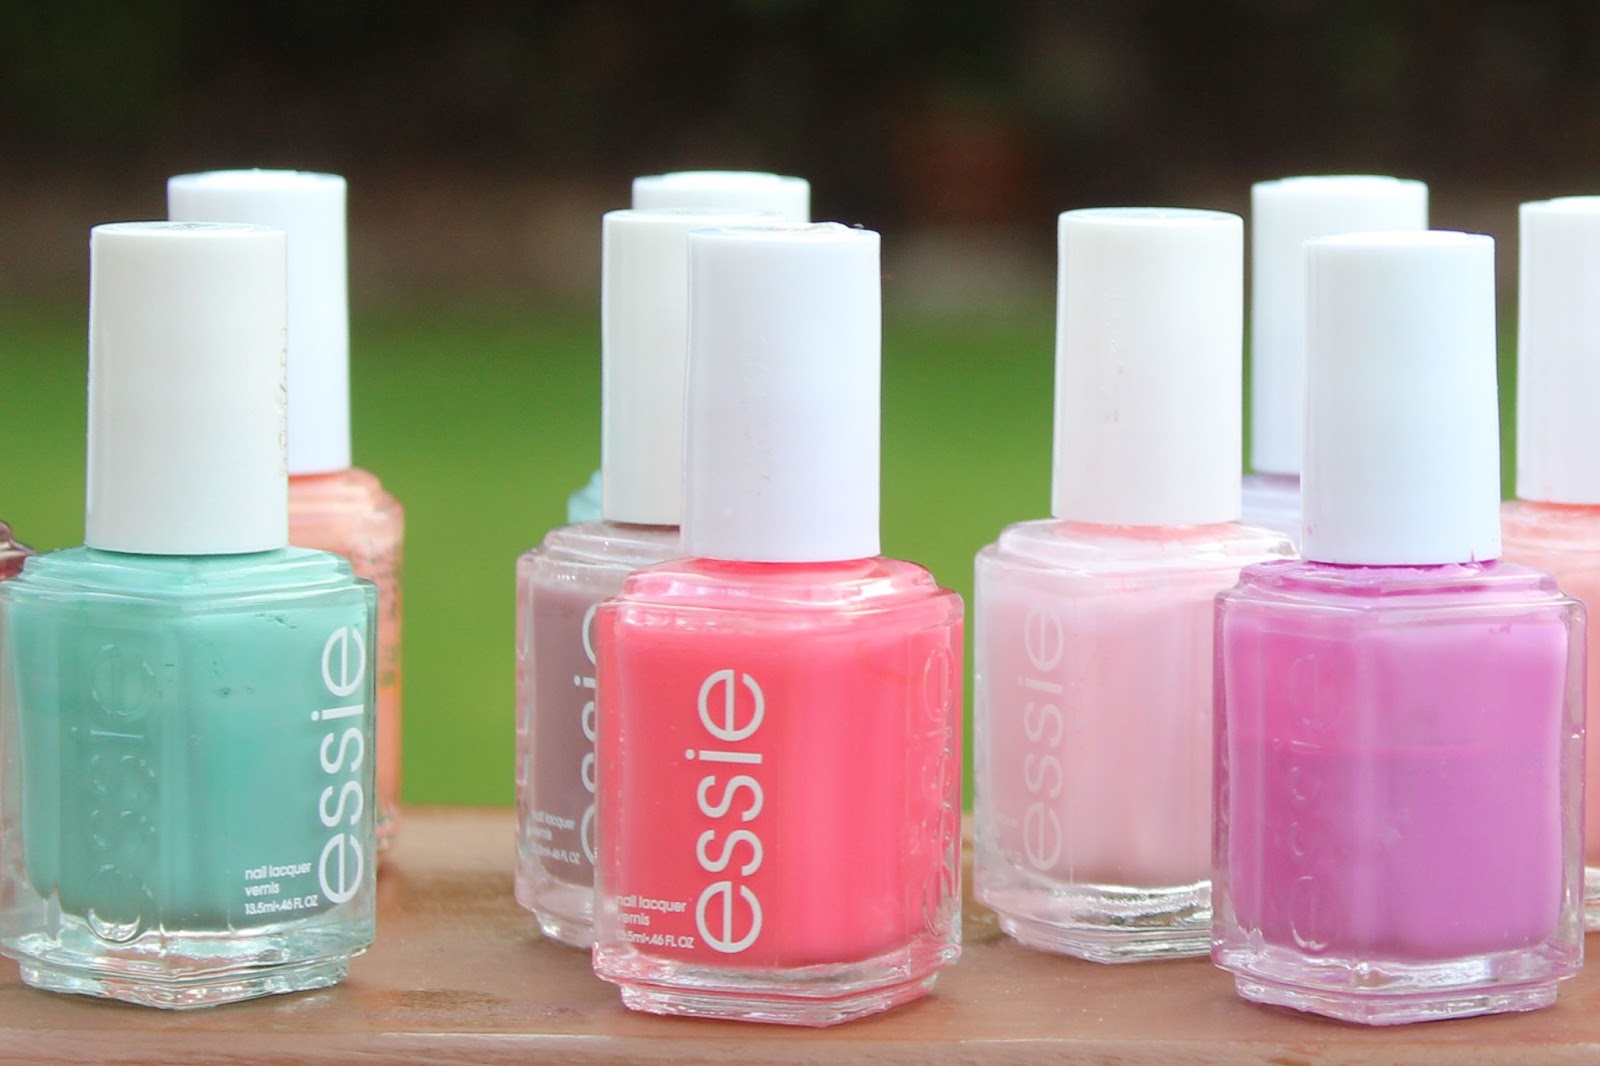 2. Essie Nail Polish in "A Touch of Color" - wide 8